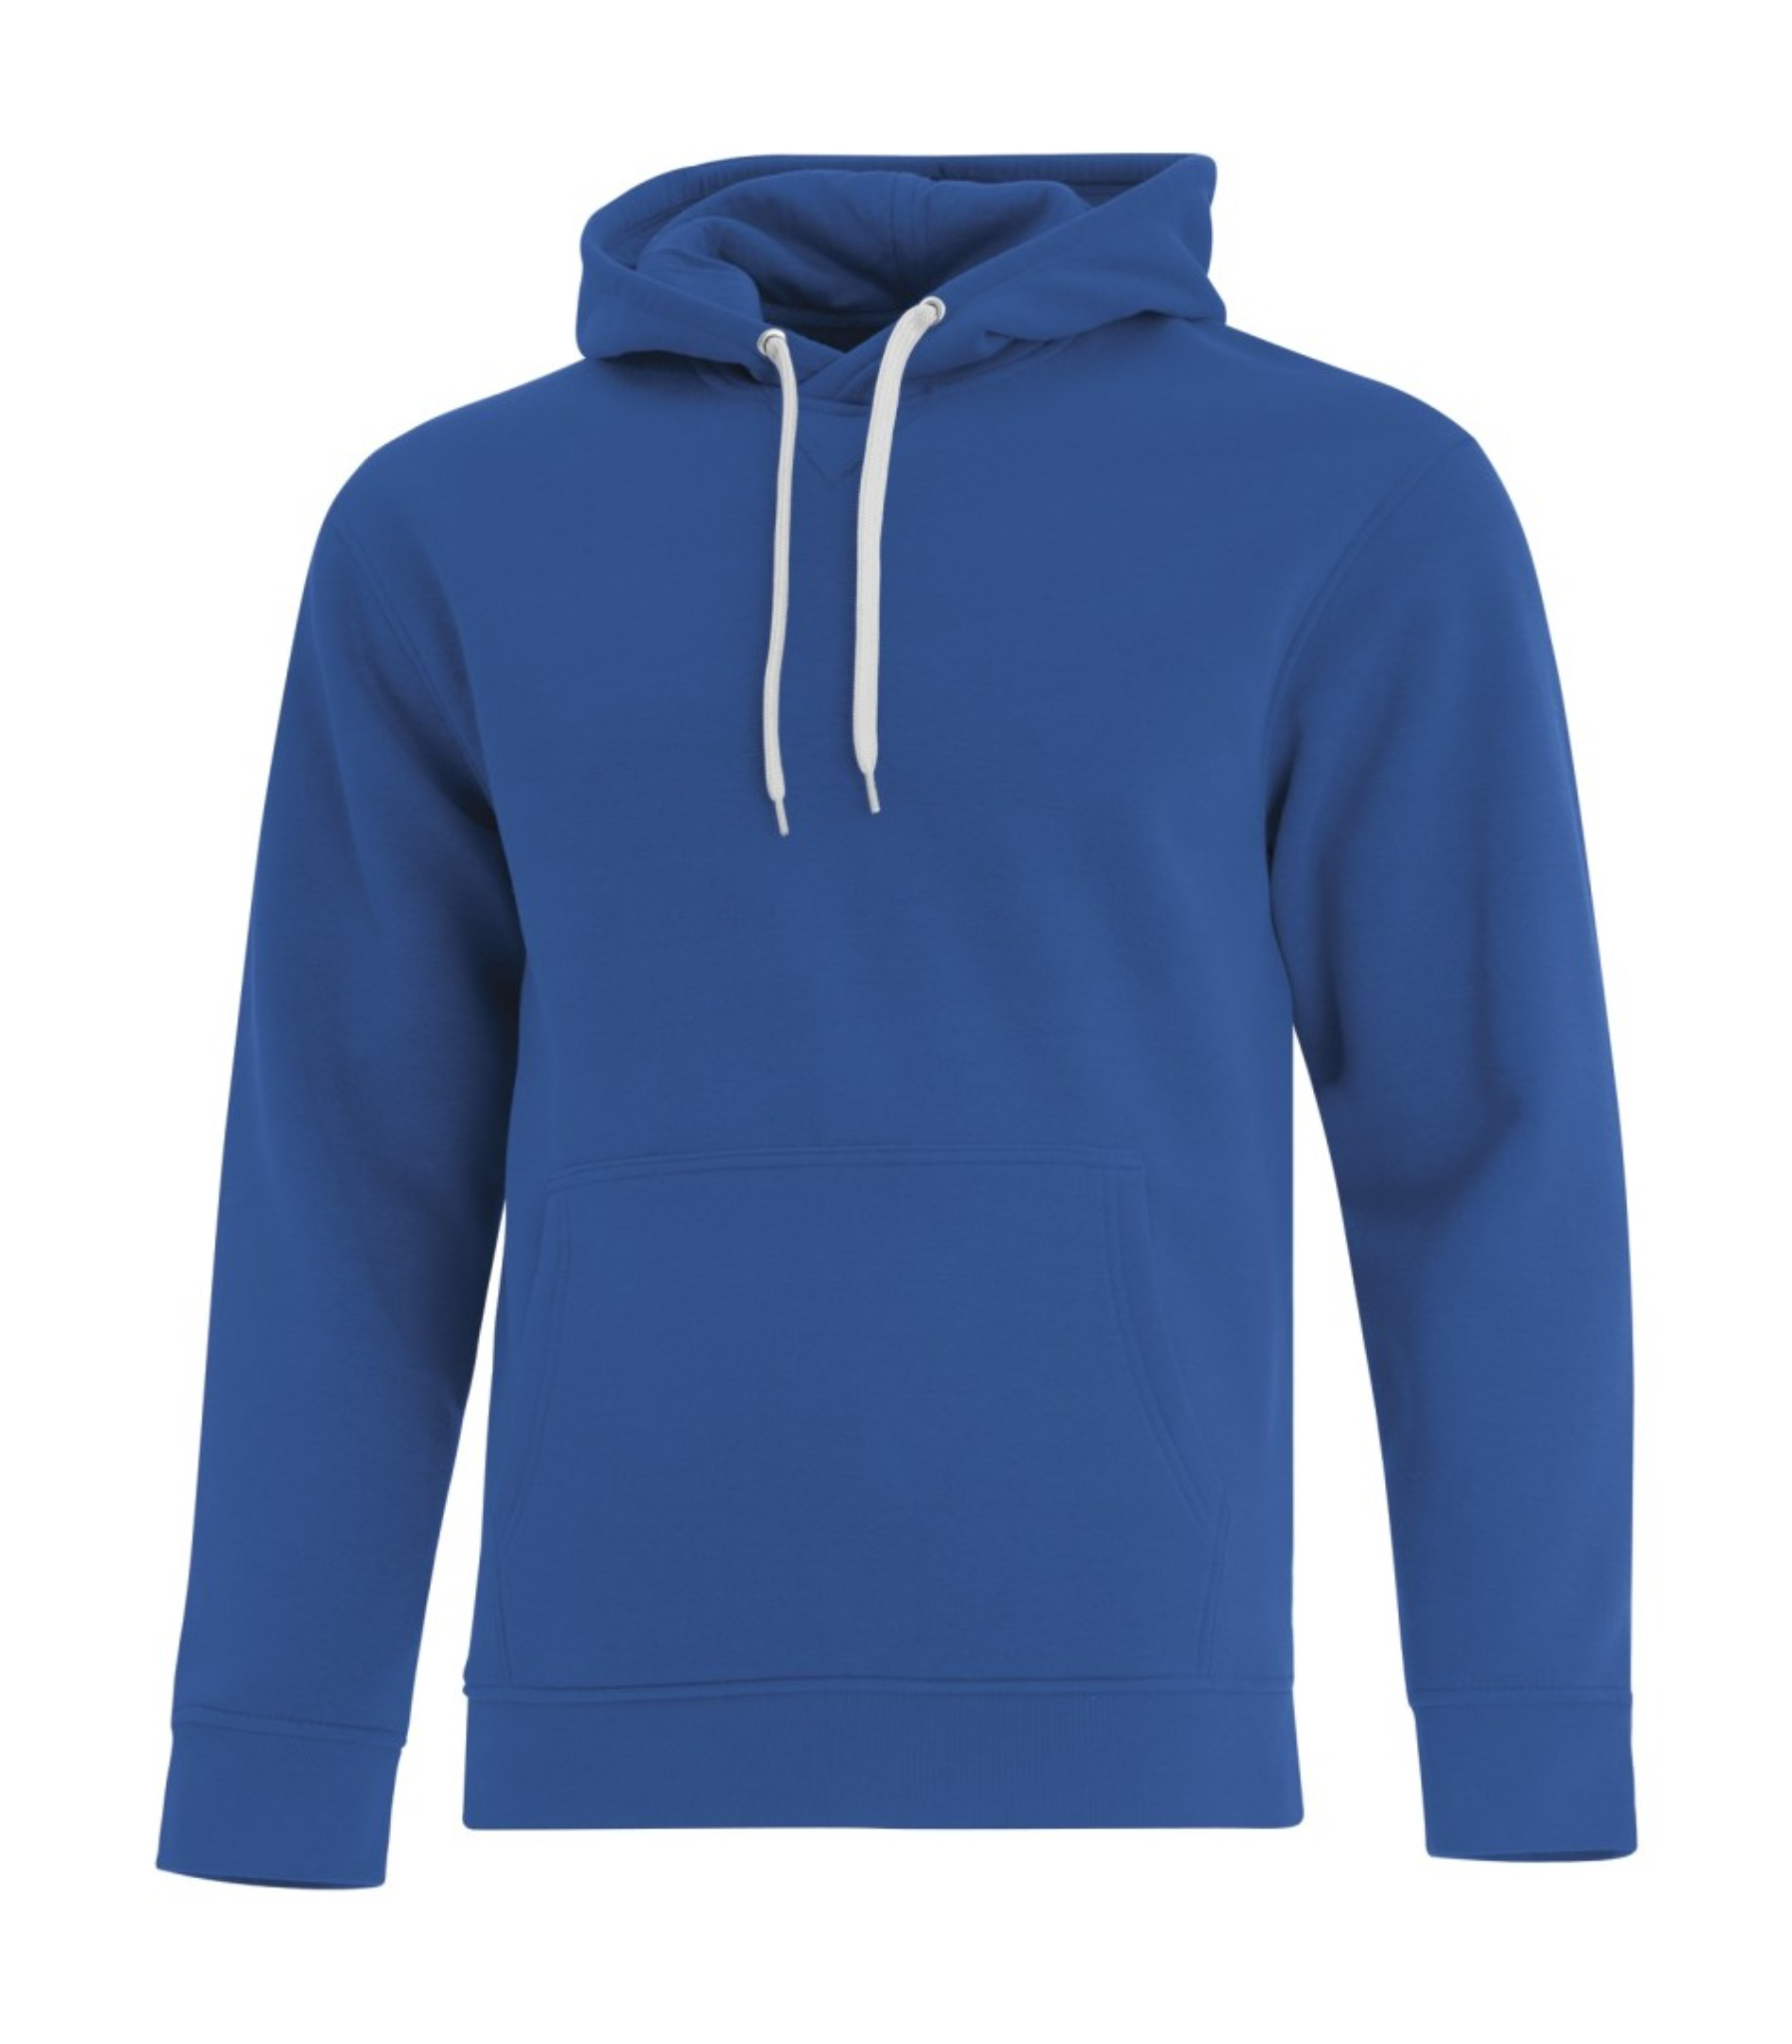 True Royal Blue Adult Hoodie - Cotton/Polyester - ATC F2016